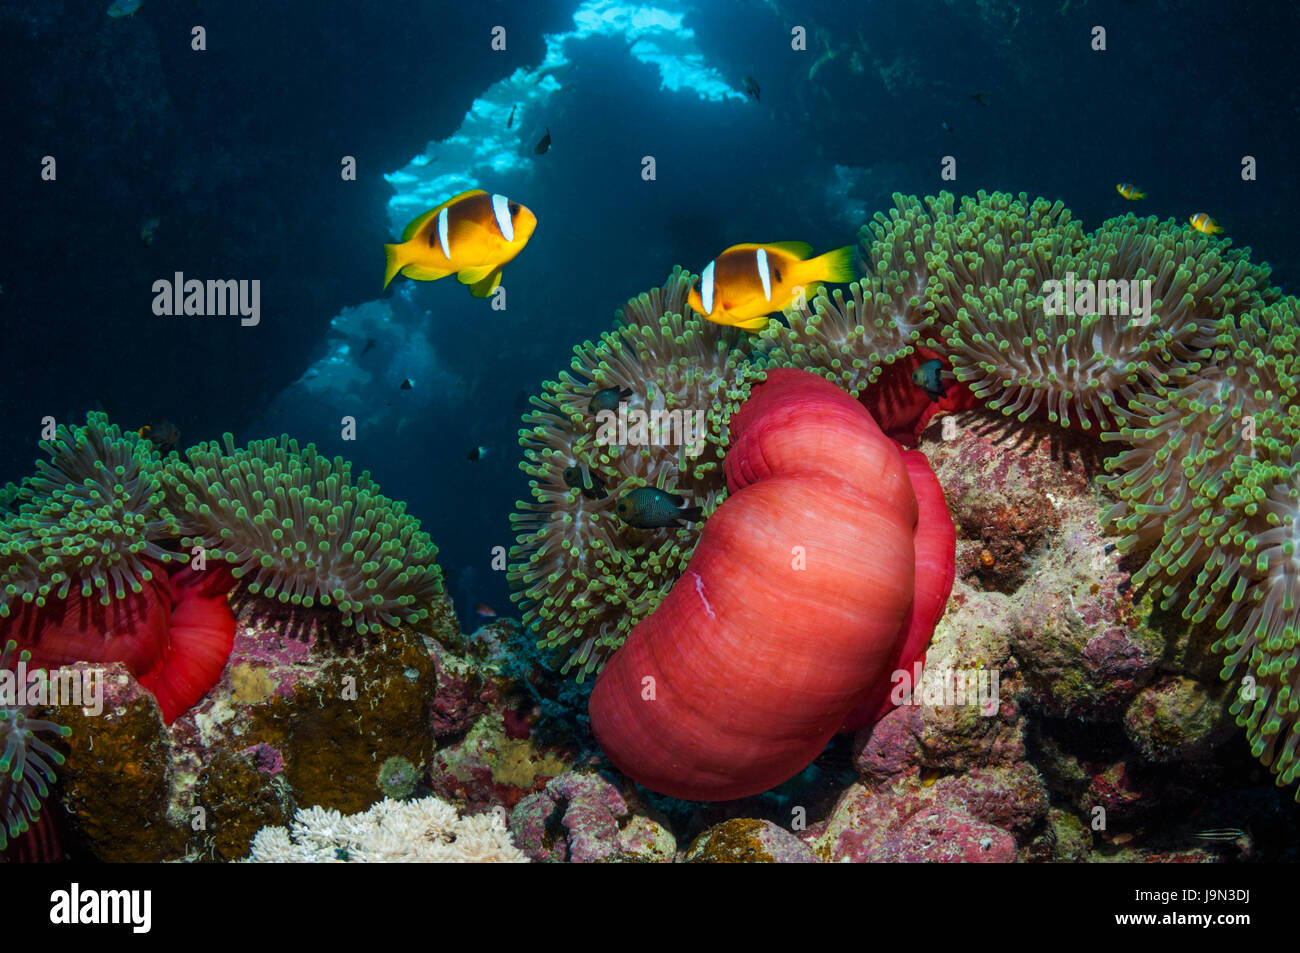 Red Sea anemonefish [Amphiprion bicinctus] with Magnificent anemone [Heteractis magnifica].  Egypt, Red Sea. Stock Photo